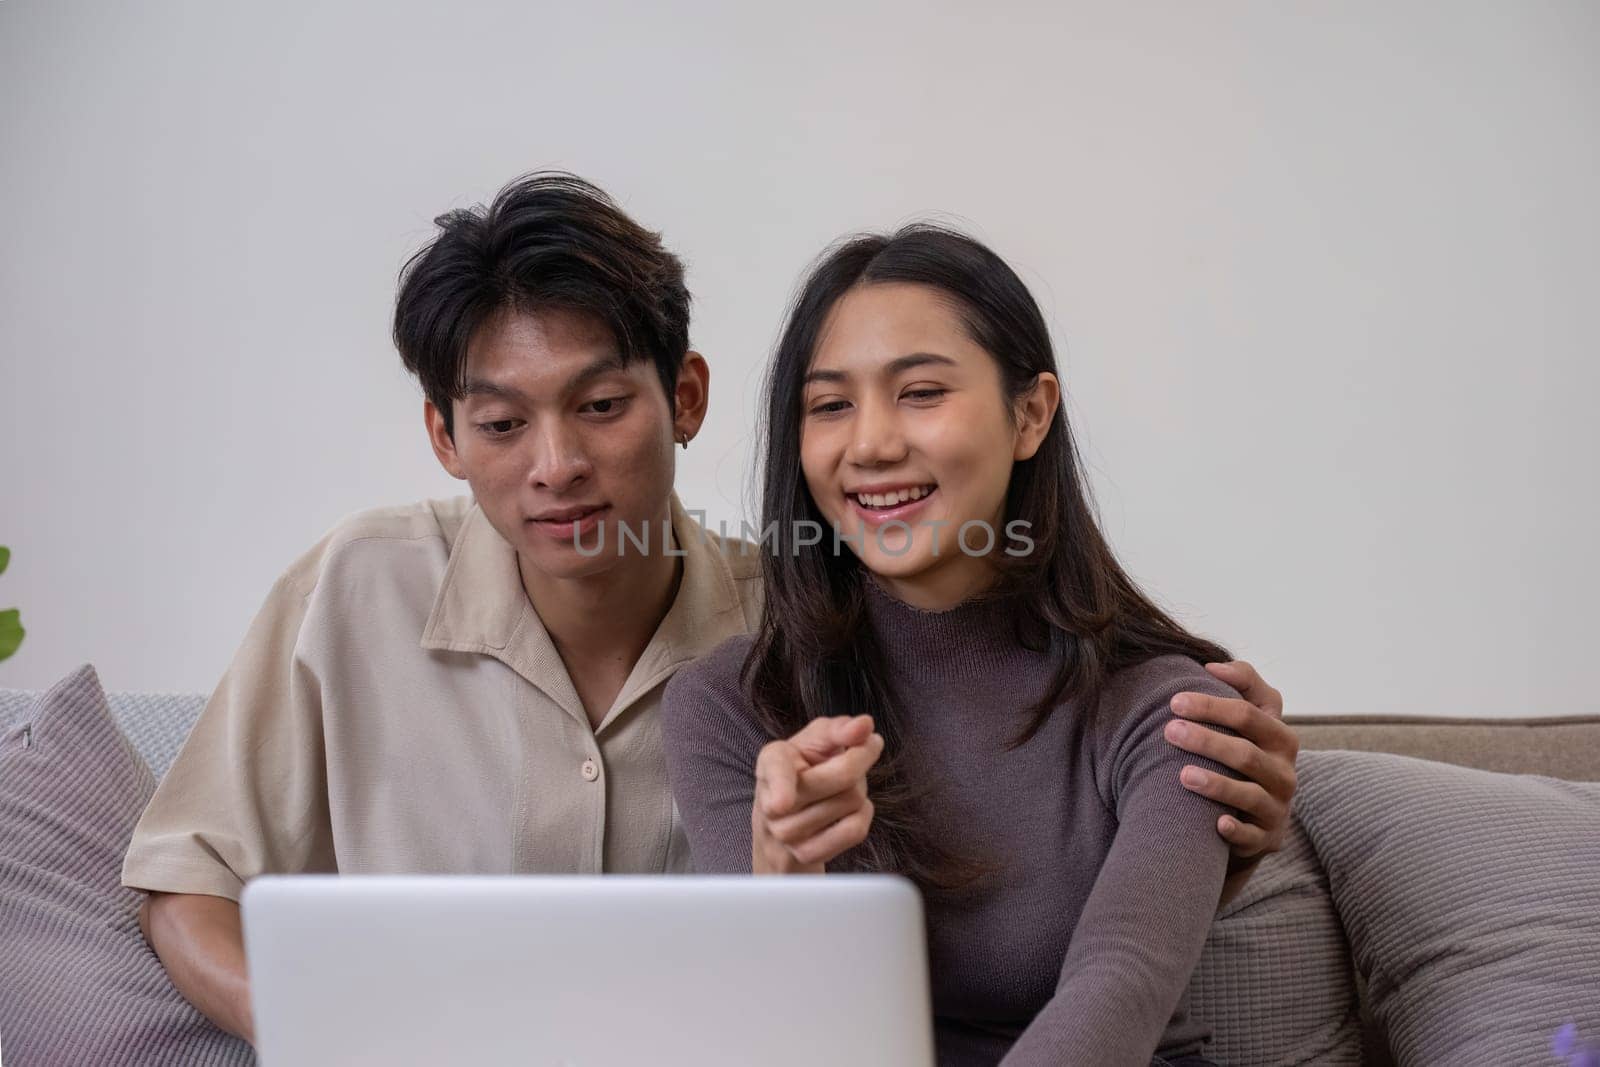 Asian couple watching movies on the internet using laptop at home Smiling Thai man and woman sitting on sofa, hugging each other, looking at computer screen. Surf the web together copy space.